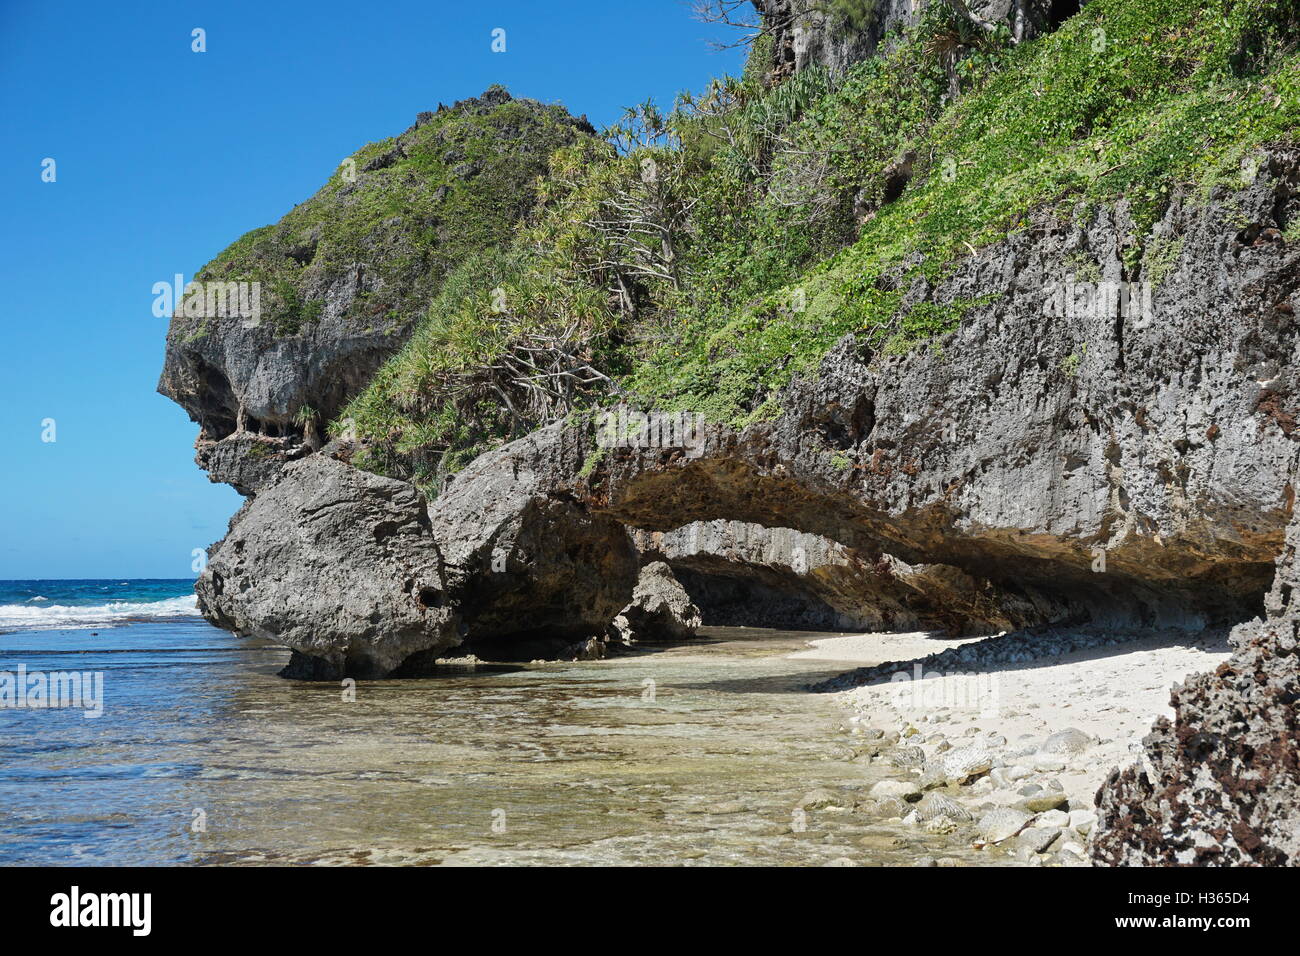 Eroded limestone cliff with a natural arch on the shore of Rurutu island, Pacific ocean, Austral archipelago, French Polynesia Stock Photo